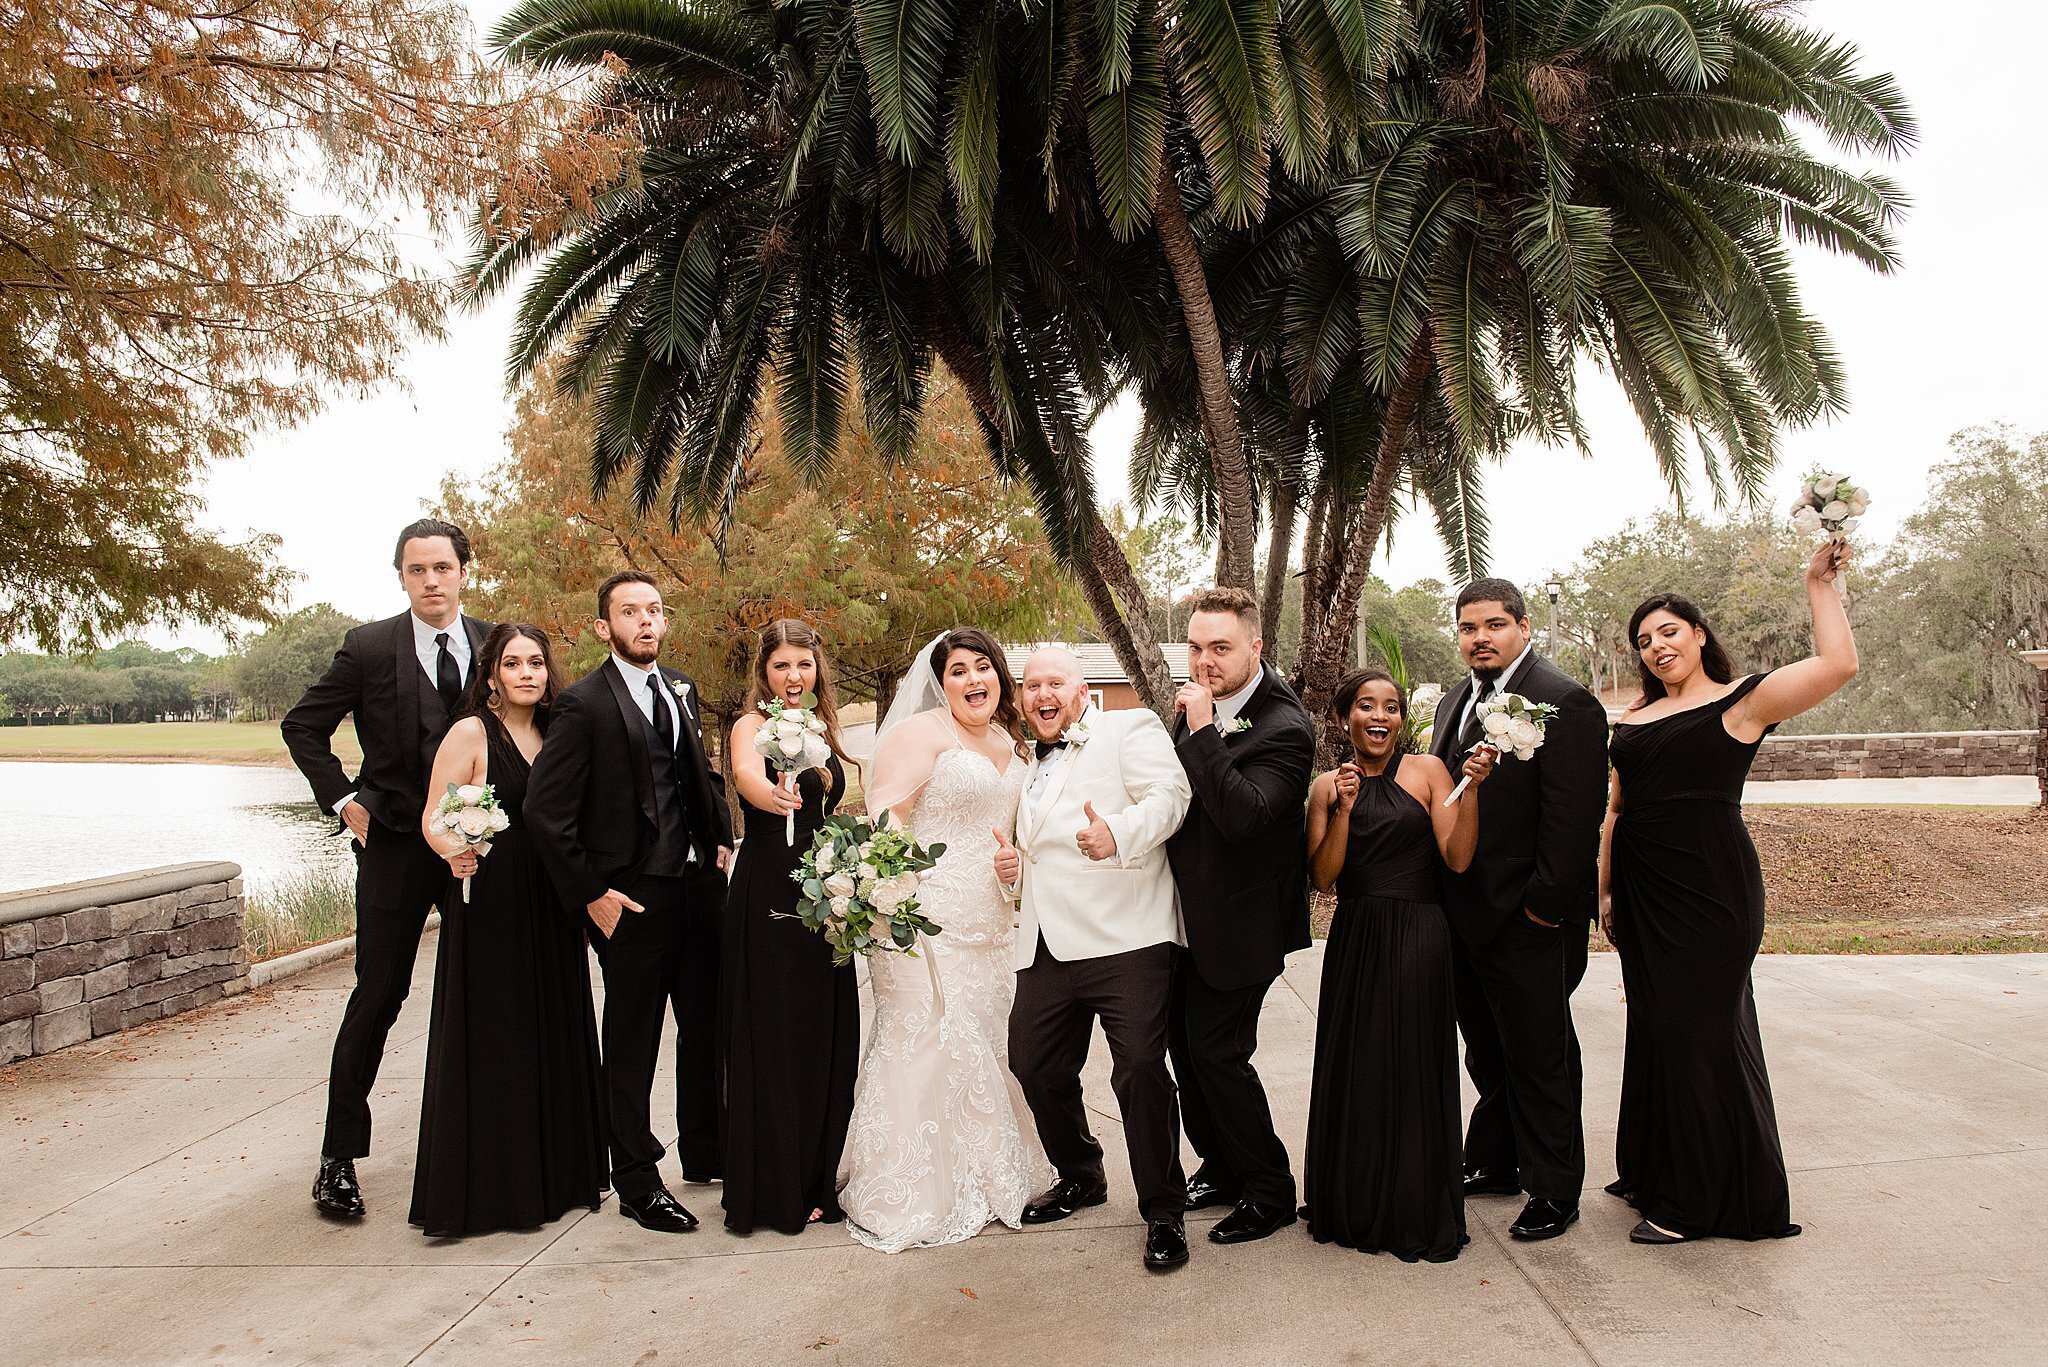 Classic black and white attire for wedding in Orlando featuring palm trees